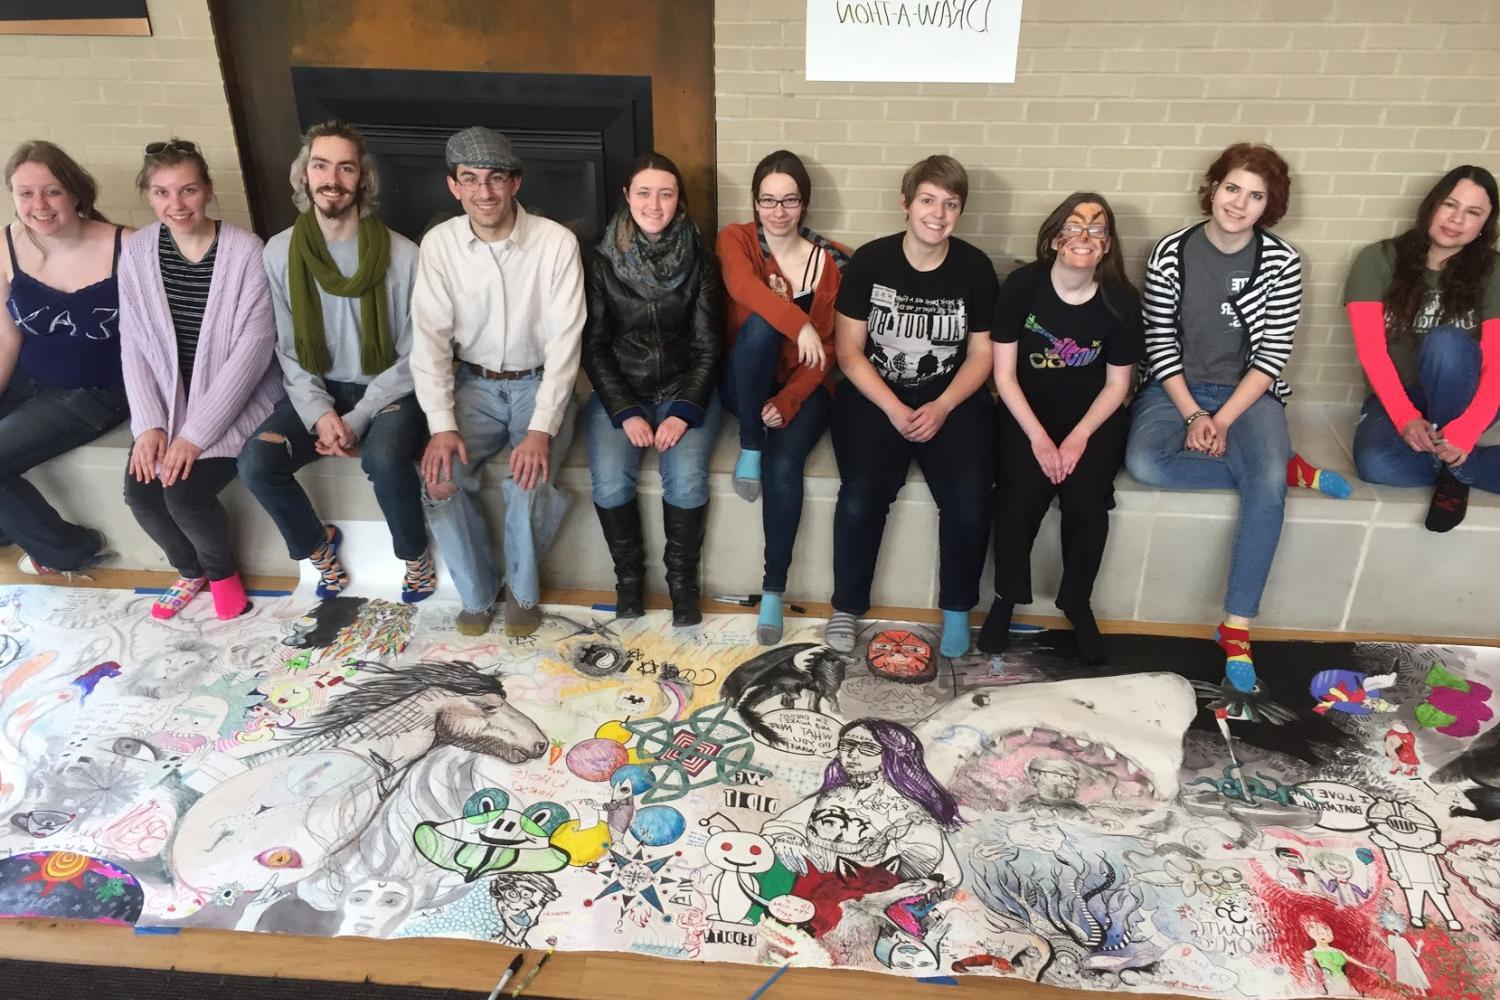 Students show off their work during a 24-hour Draw-A-Thon. (Fall 2017)